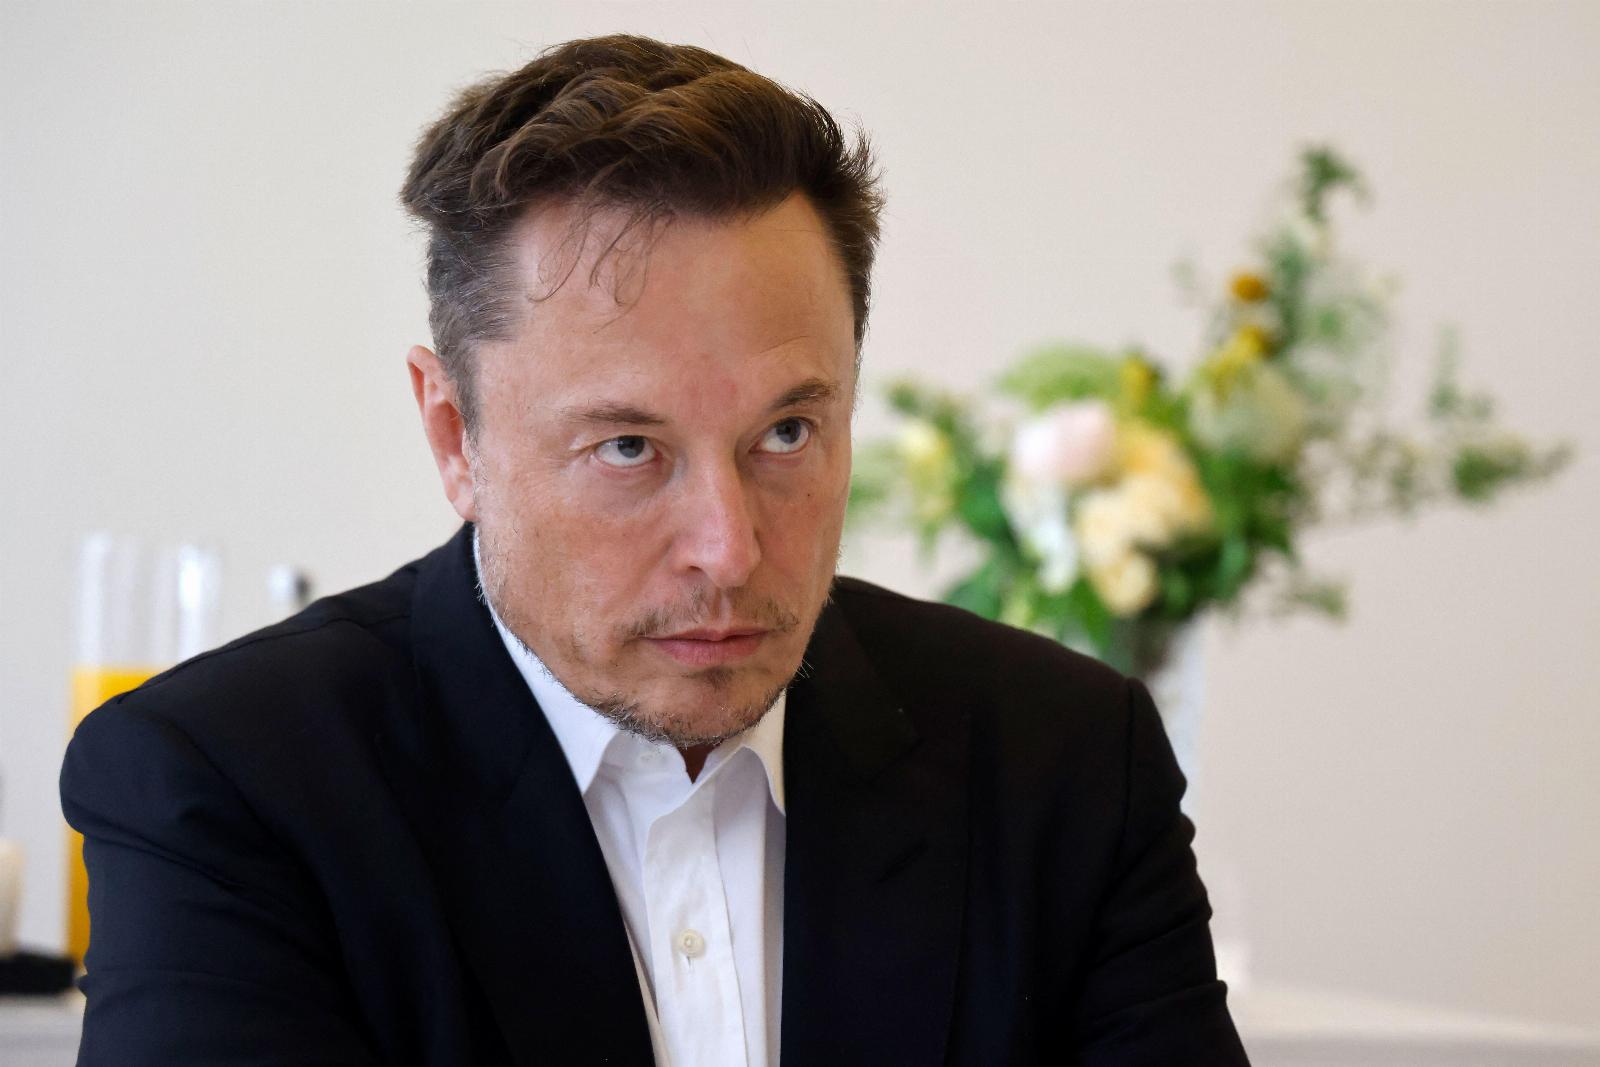 Elon Musk Didn’t Just Do Turkey’s Bidding. Censoring for Strongmen Is Now a Pattern.